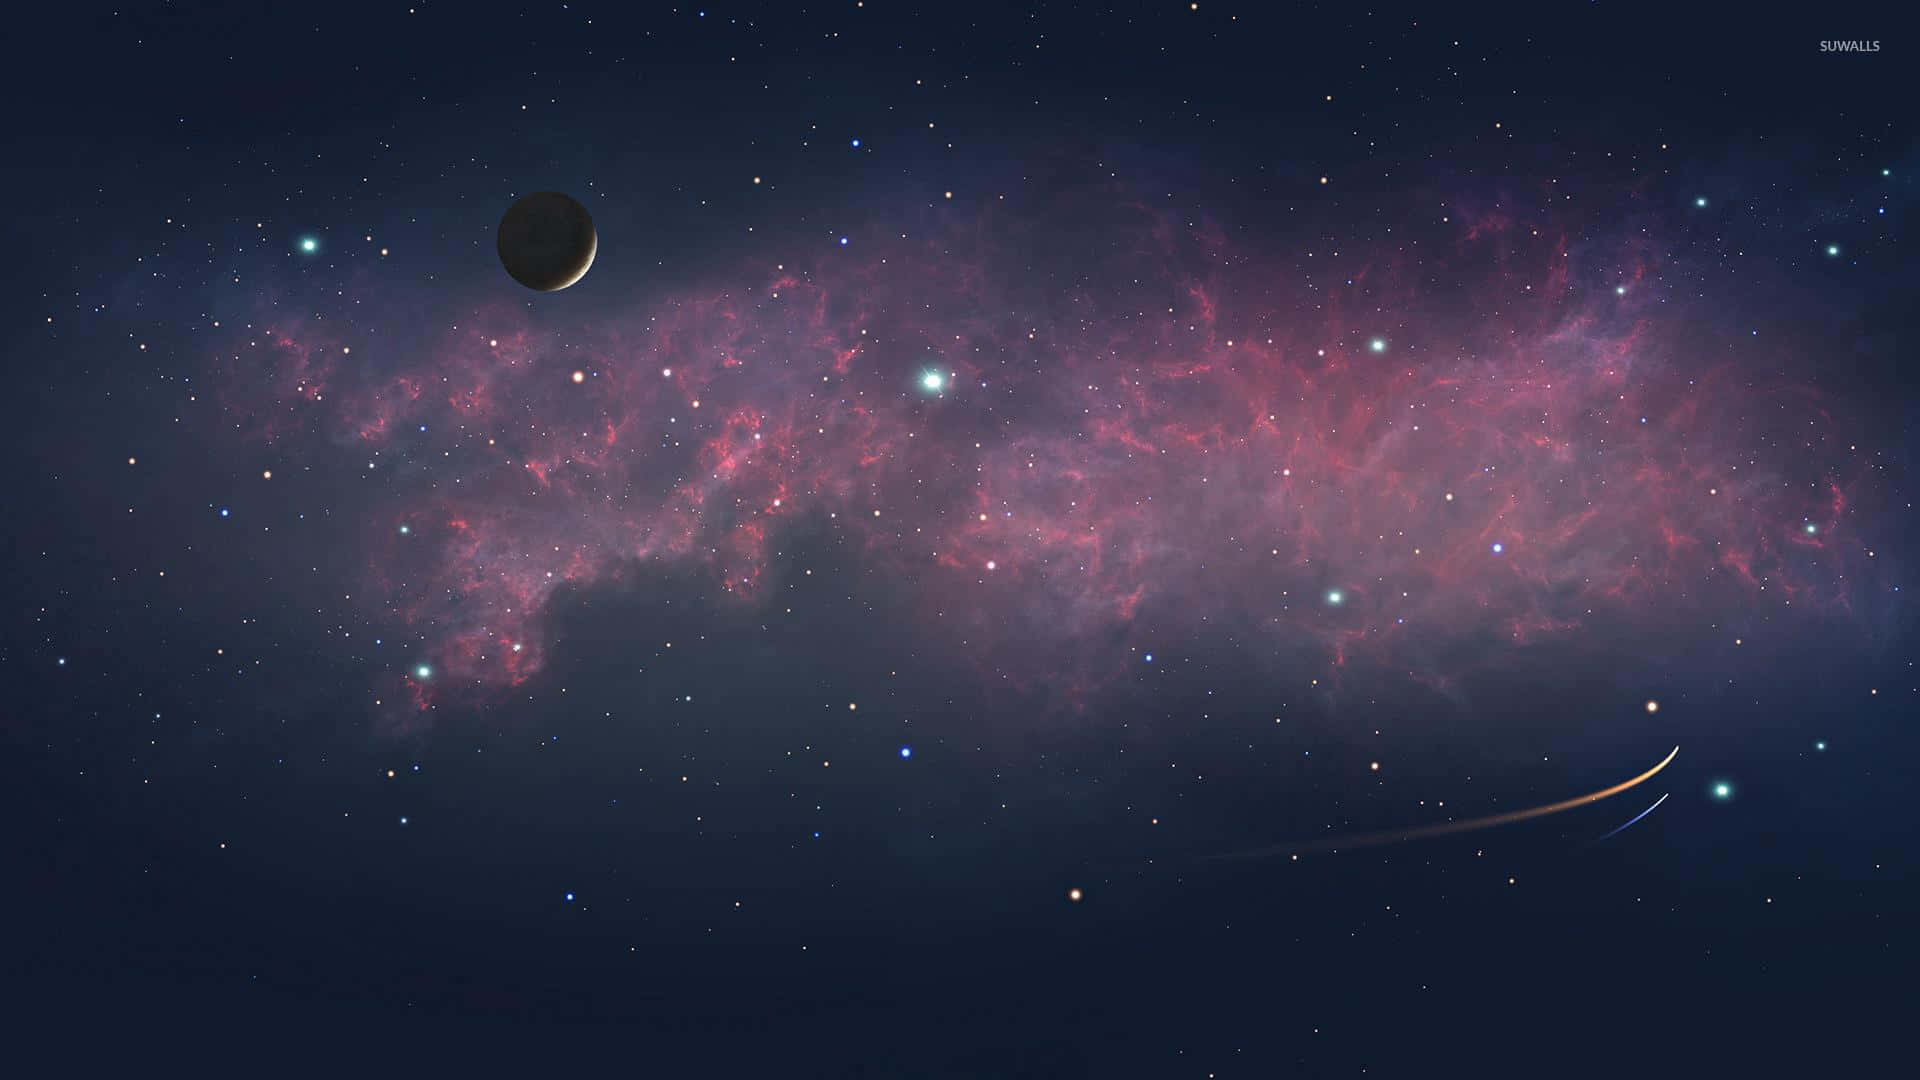 A Space Scene With A Planet And Stars Wallpaper